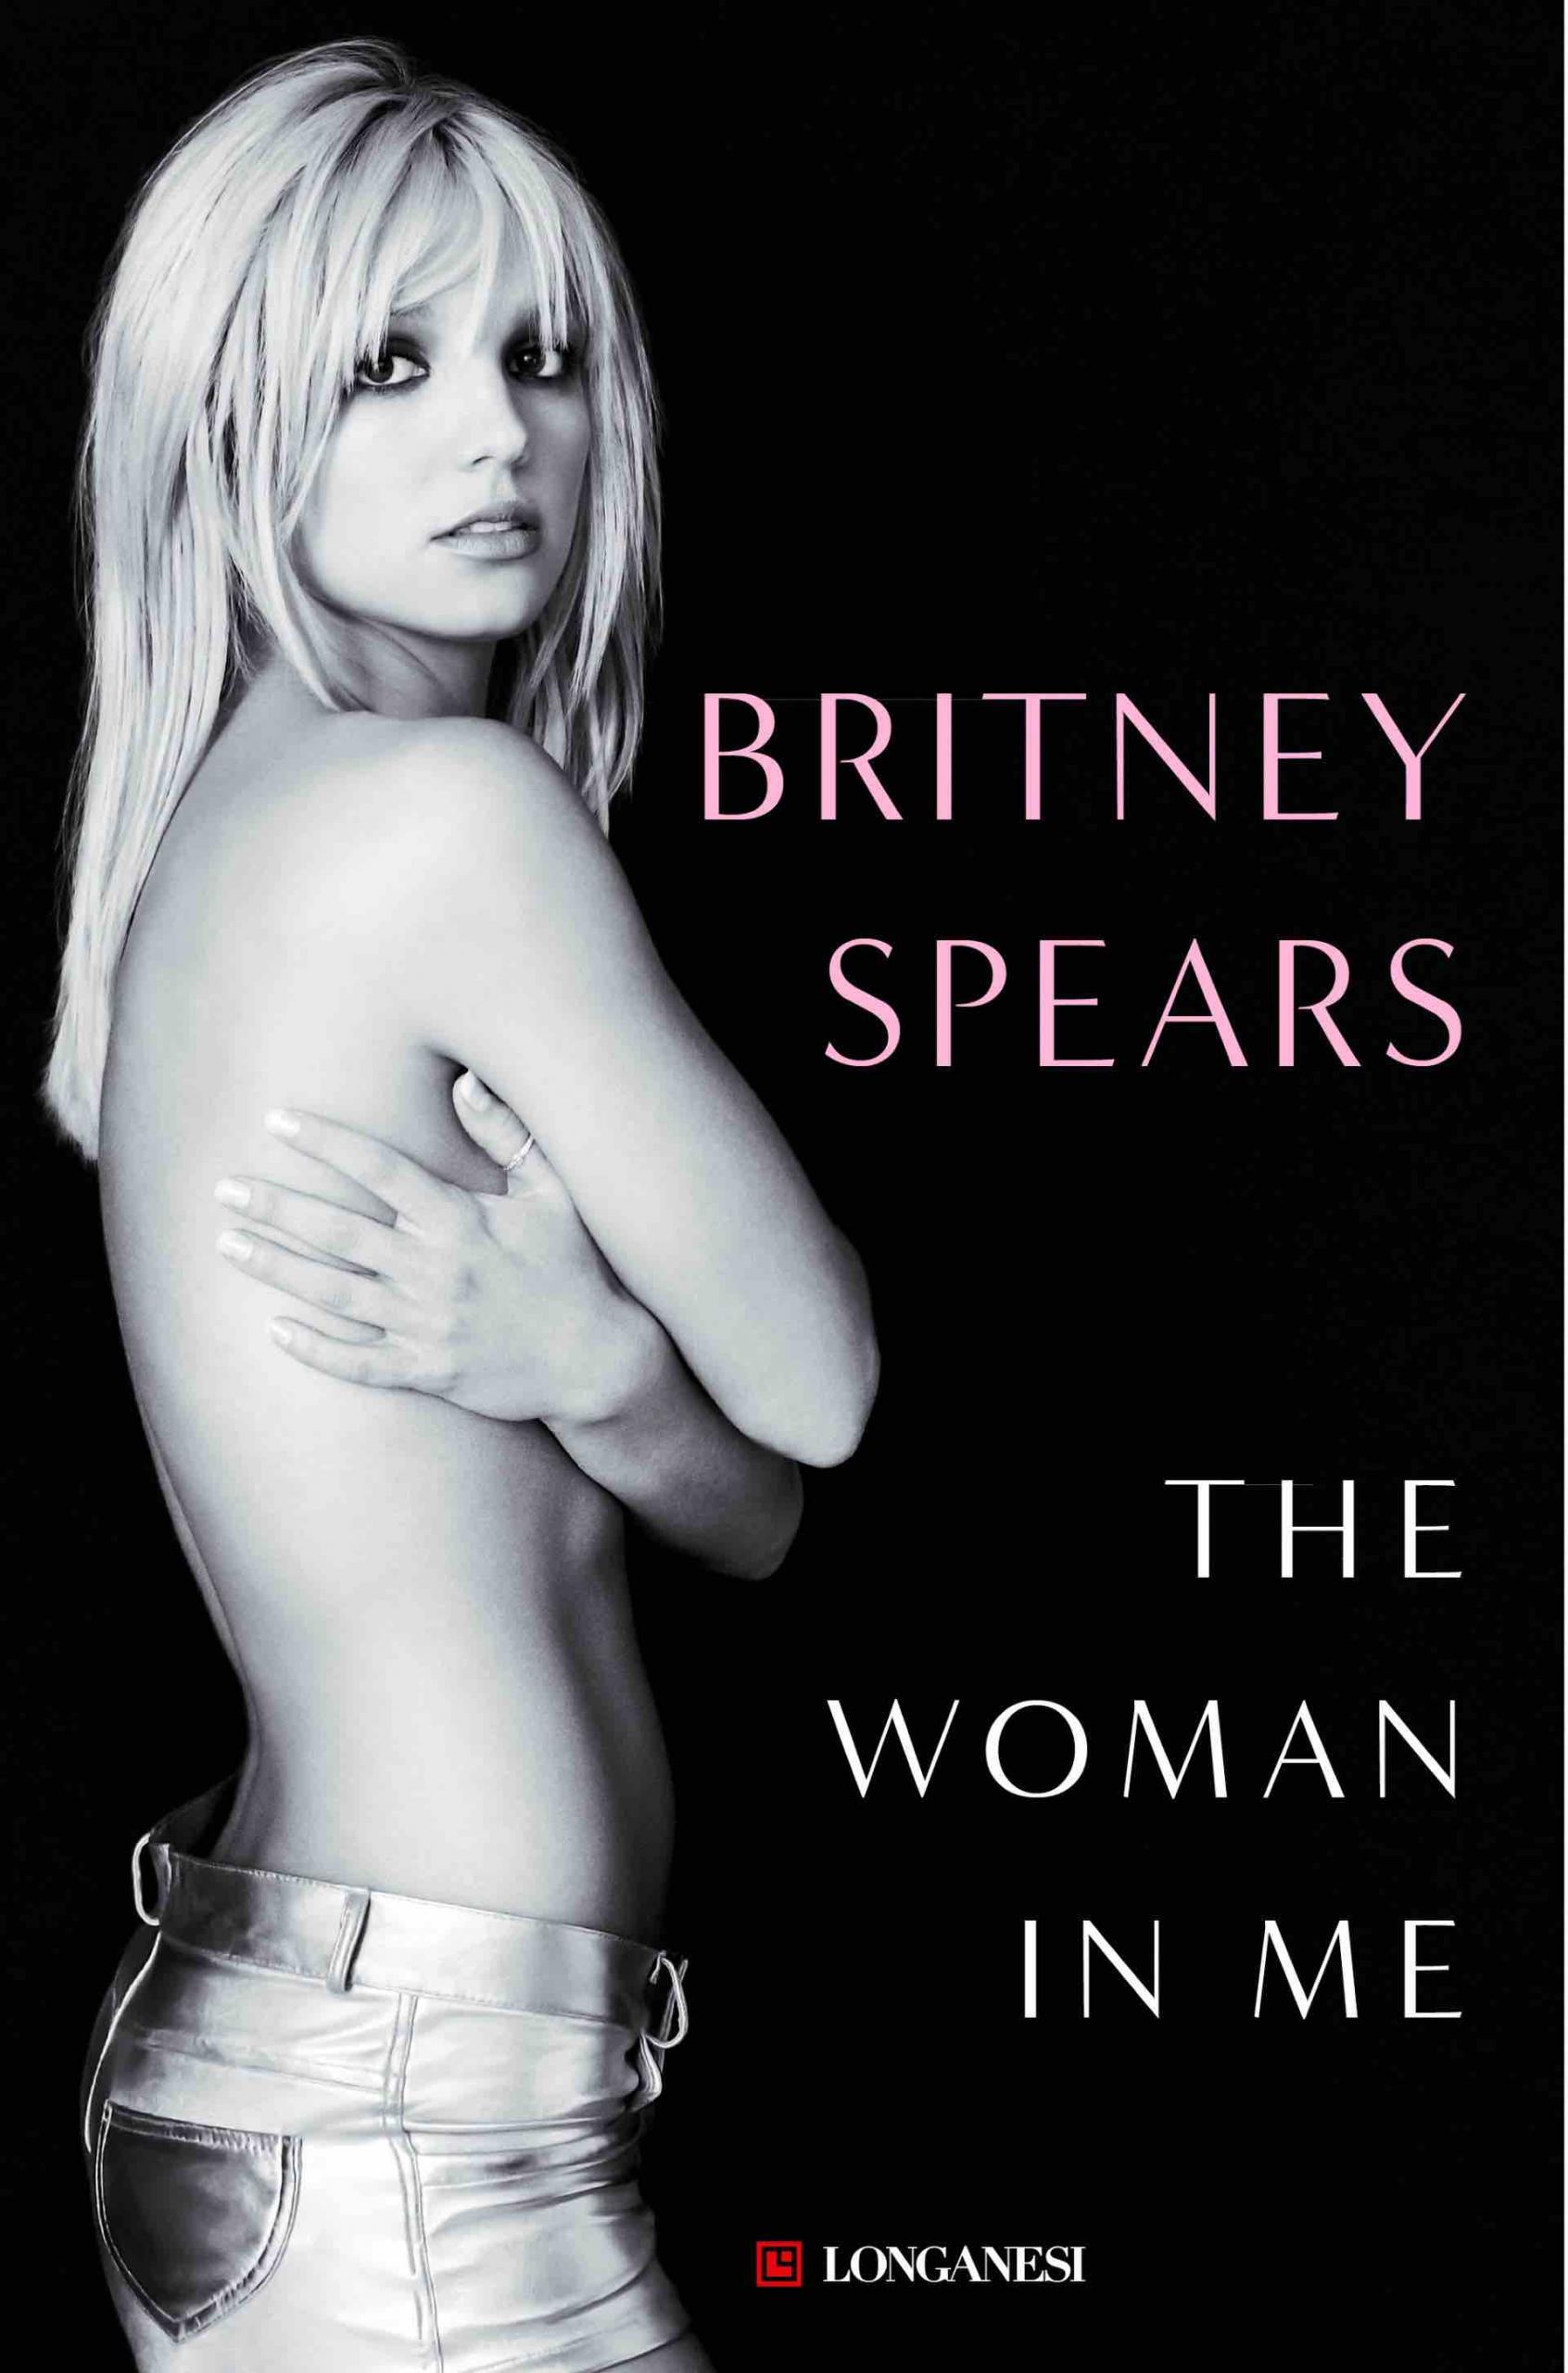 Britney_The Woman in me